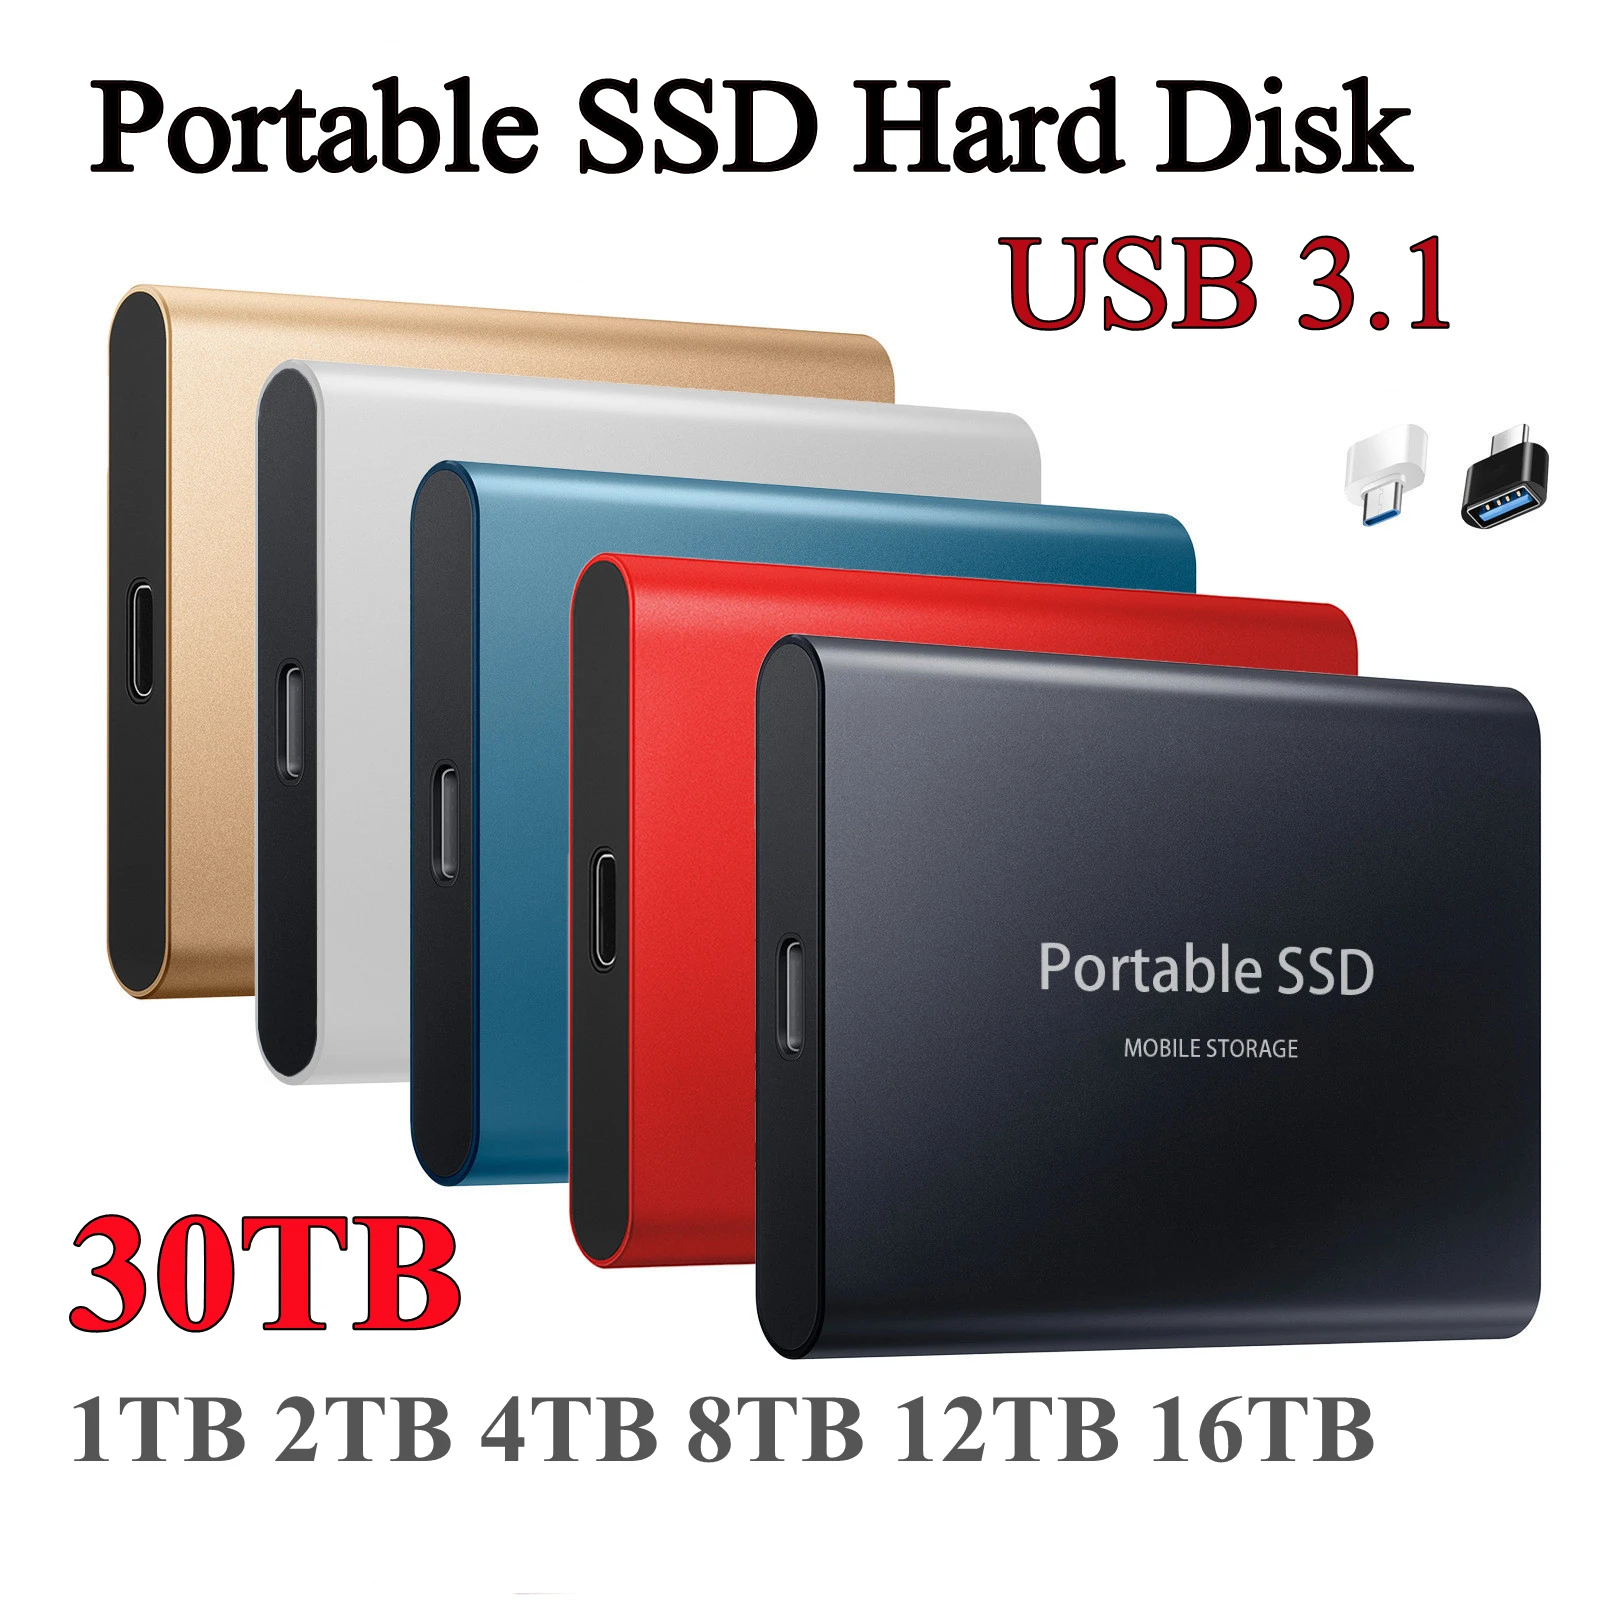 

SSD Portable Original External Hard Drive Disks Solid State Drives For PC Laptop Computer Storage Device USB 3.1 16TB 30TB HDD